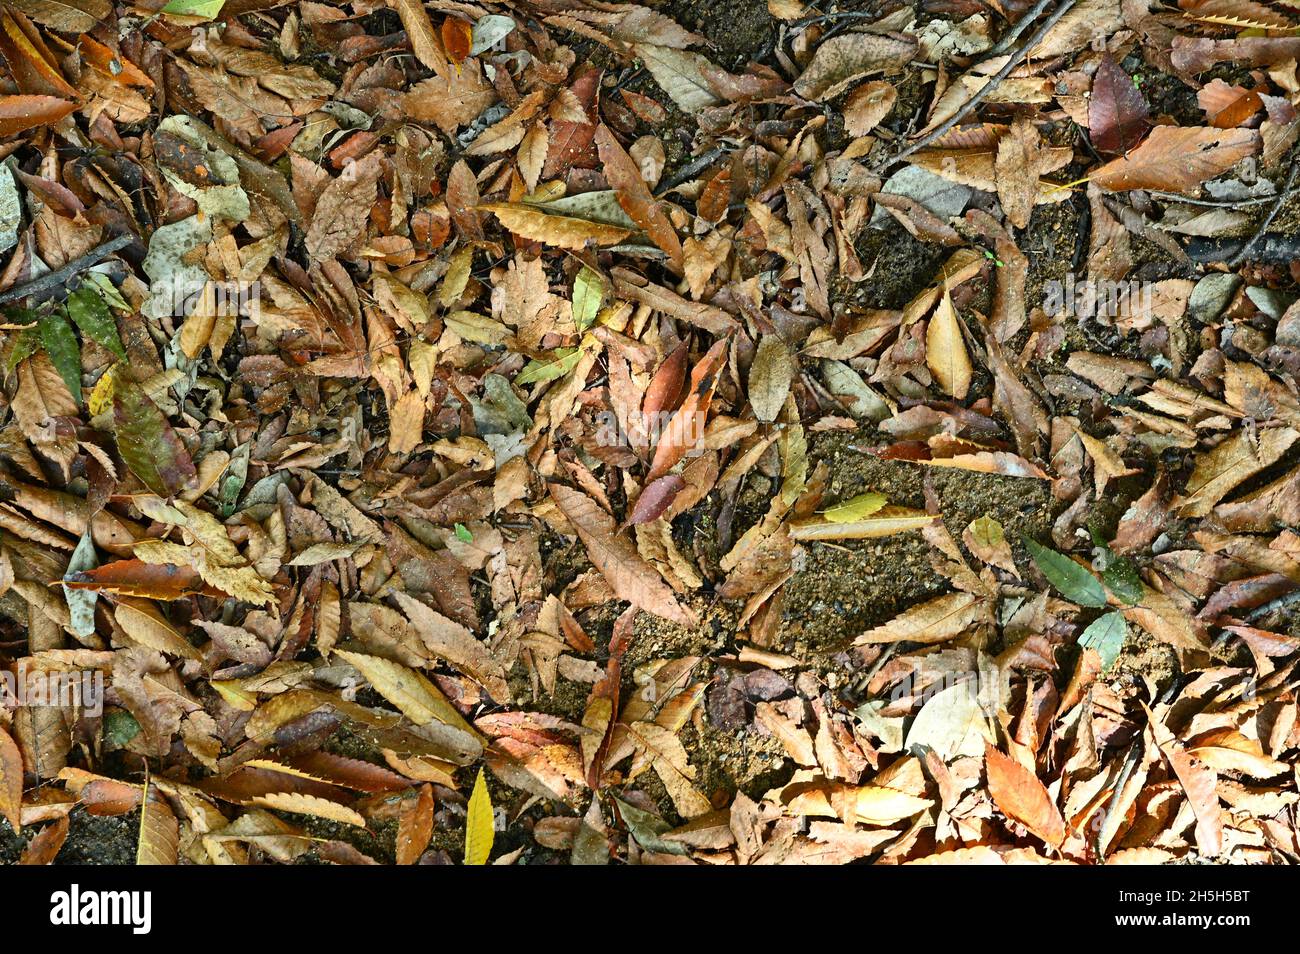 The leaves piled up on the floor. The appearance of fallen leaves on the floor shows that autumn has come. I also feel sorry for the dead leaves. Stock Photo